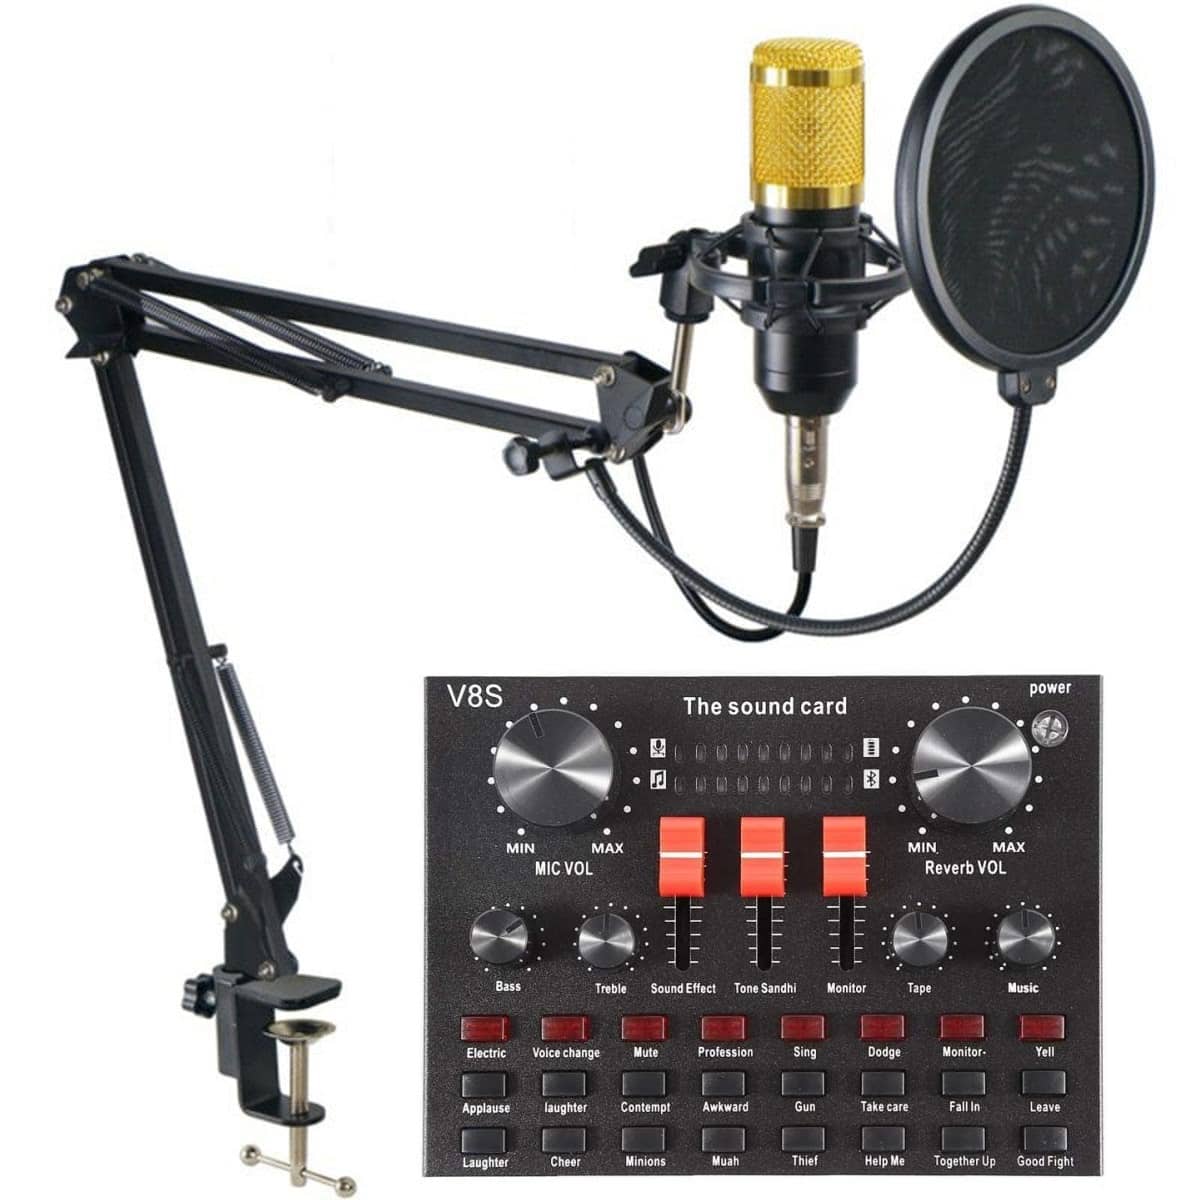 BM800 Condenser Microphone with V8S Sound Card Mixer Kit 7